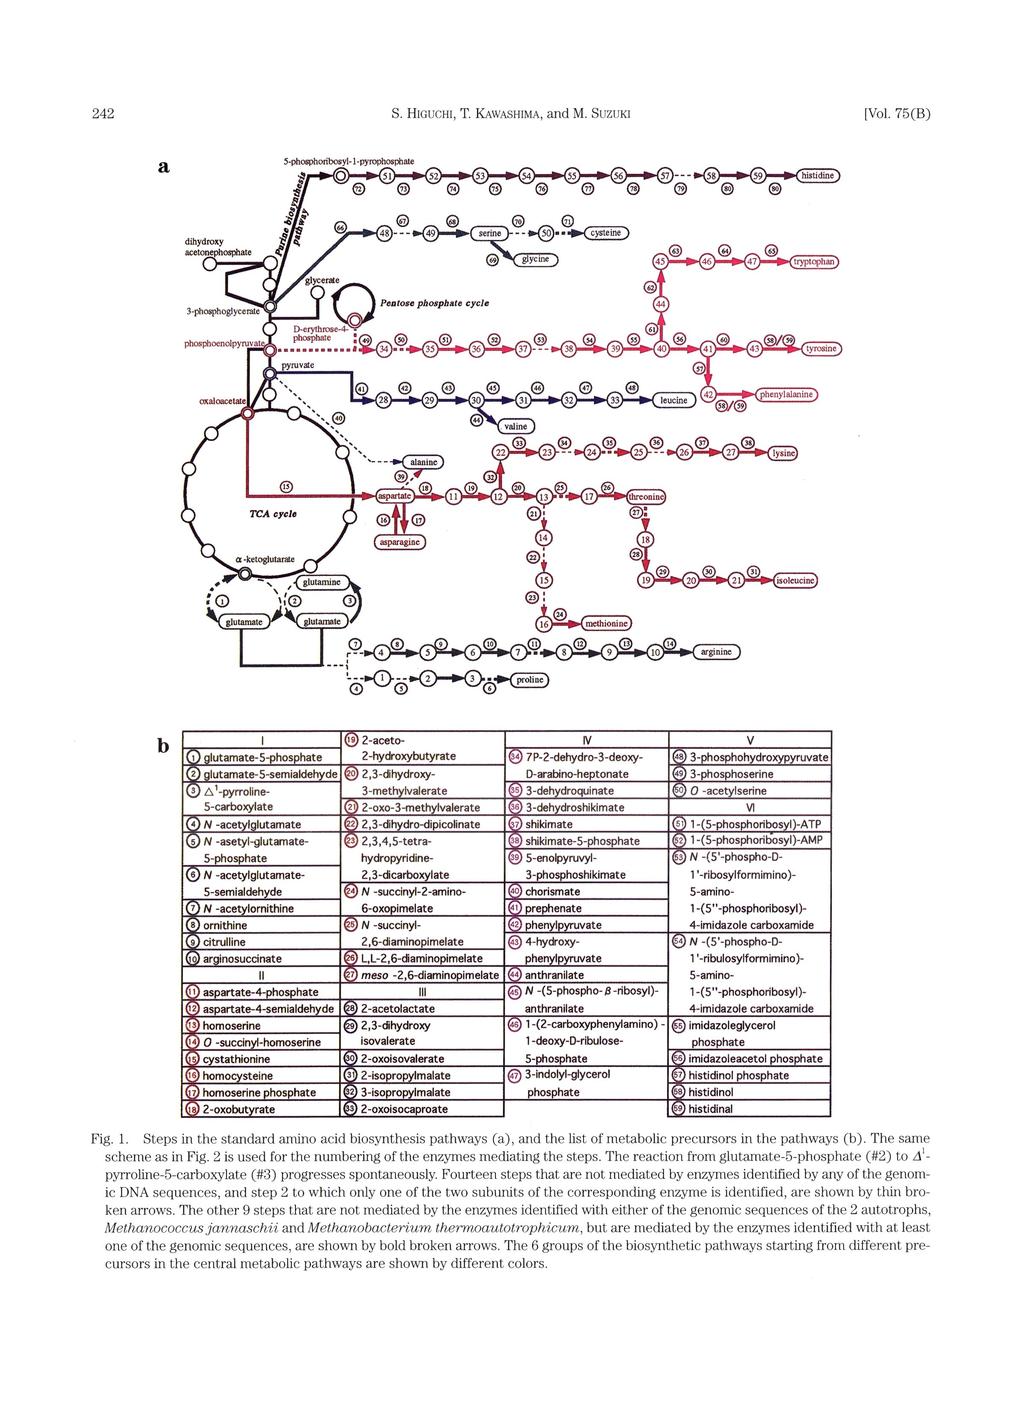 242 S. HicucHI T. KAwASHIMA, and M. SUZUKI [Vol. 75(B) Fig. 1. Steps in the standard amino acid biosynthesis pathways (a), and the list of metabolic precursors in the pathways (b).